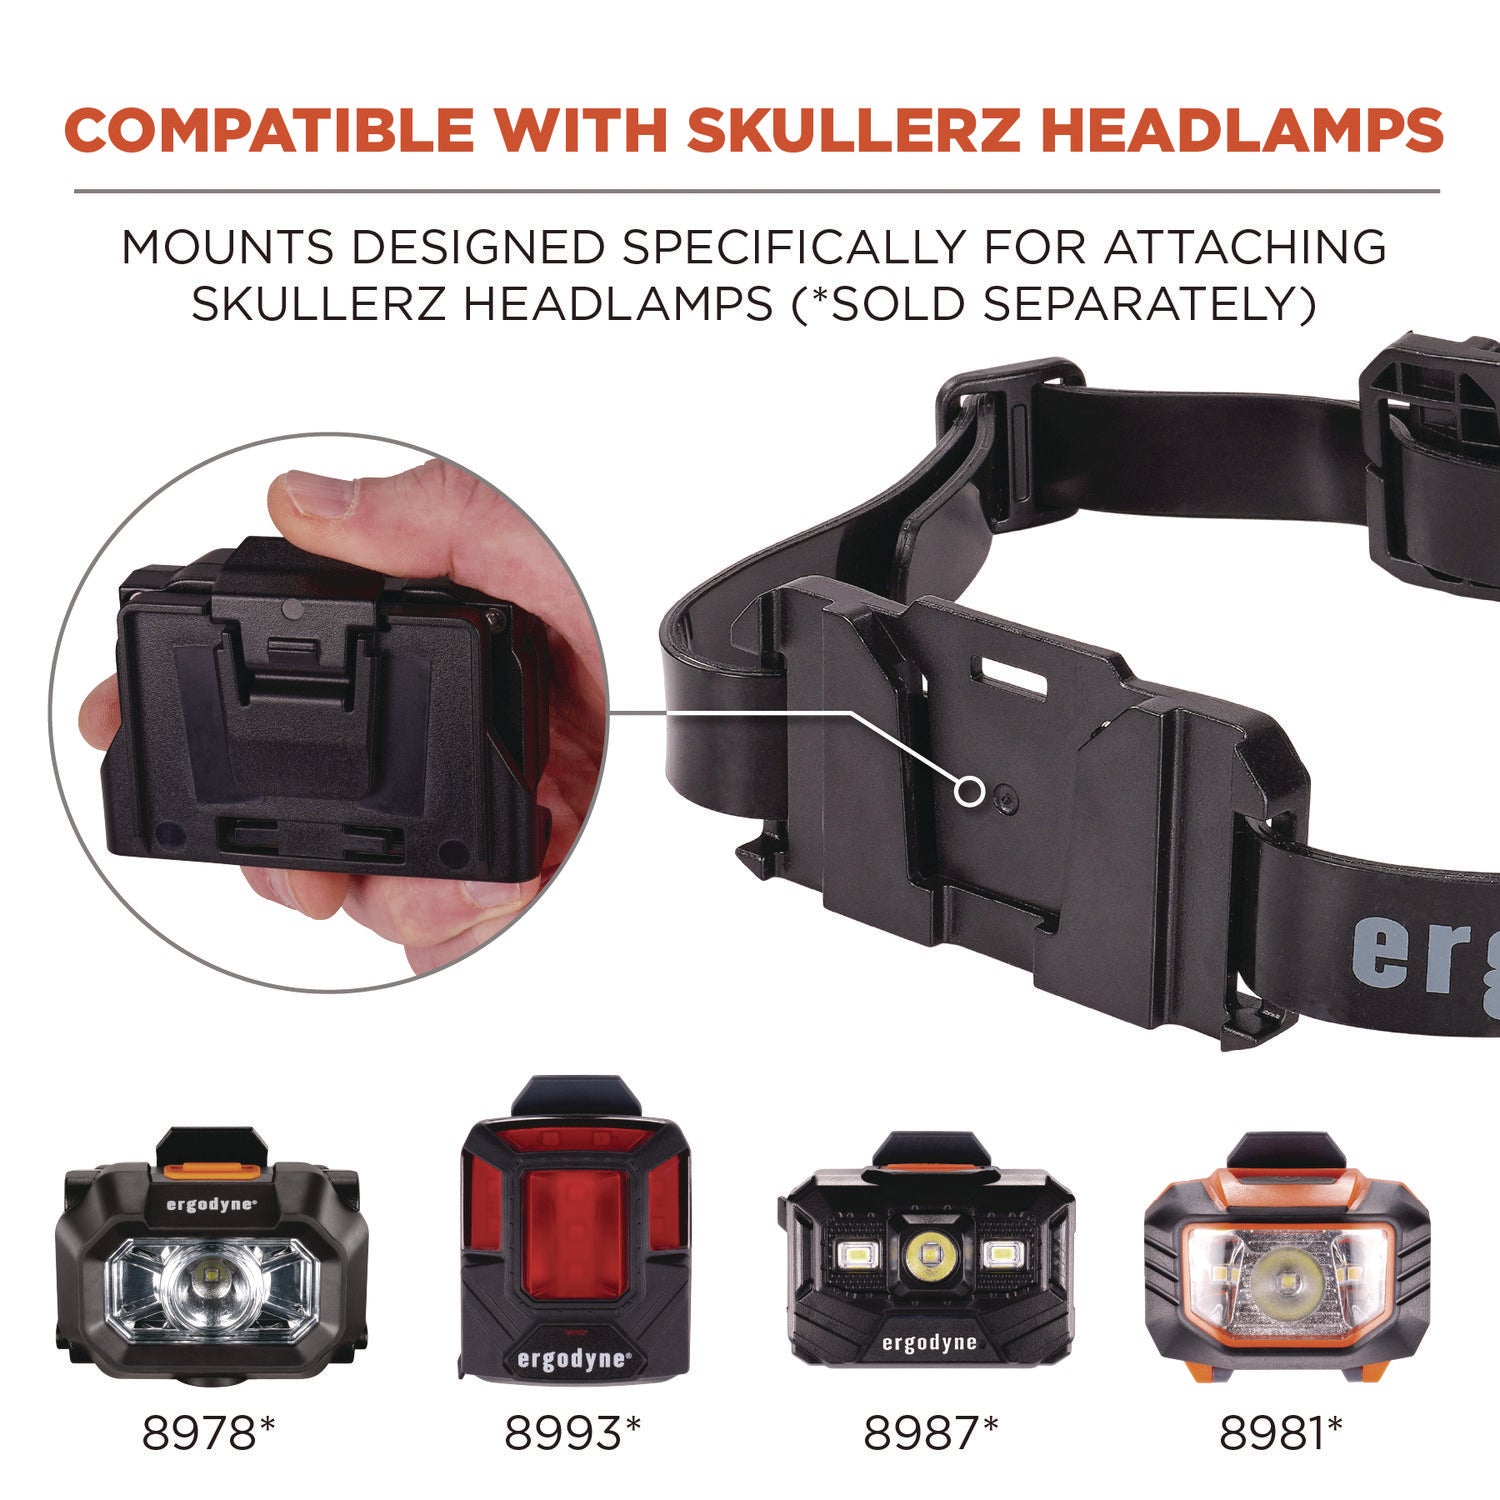 skullerz-8979-headband-light-mount-with-silicone-strap-ships-in-1-3-business-days_ego60291 - 3